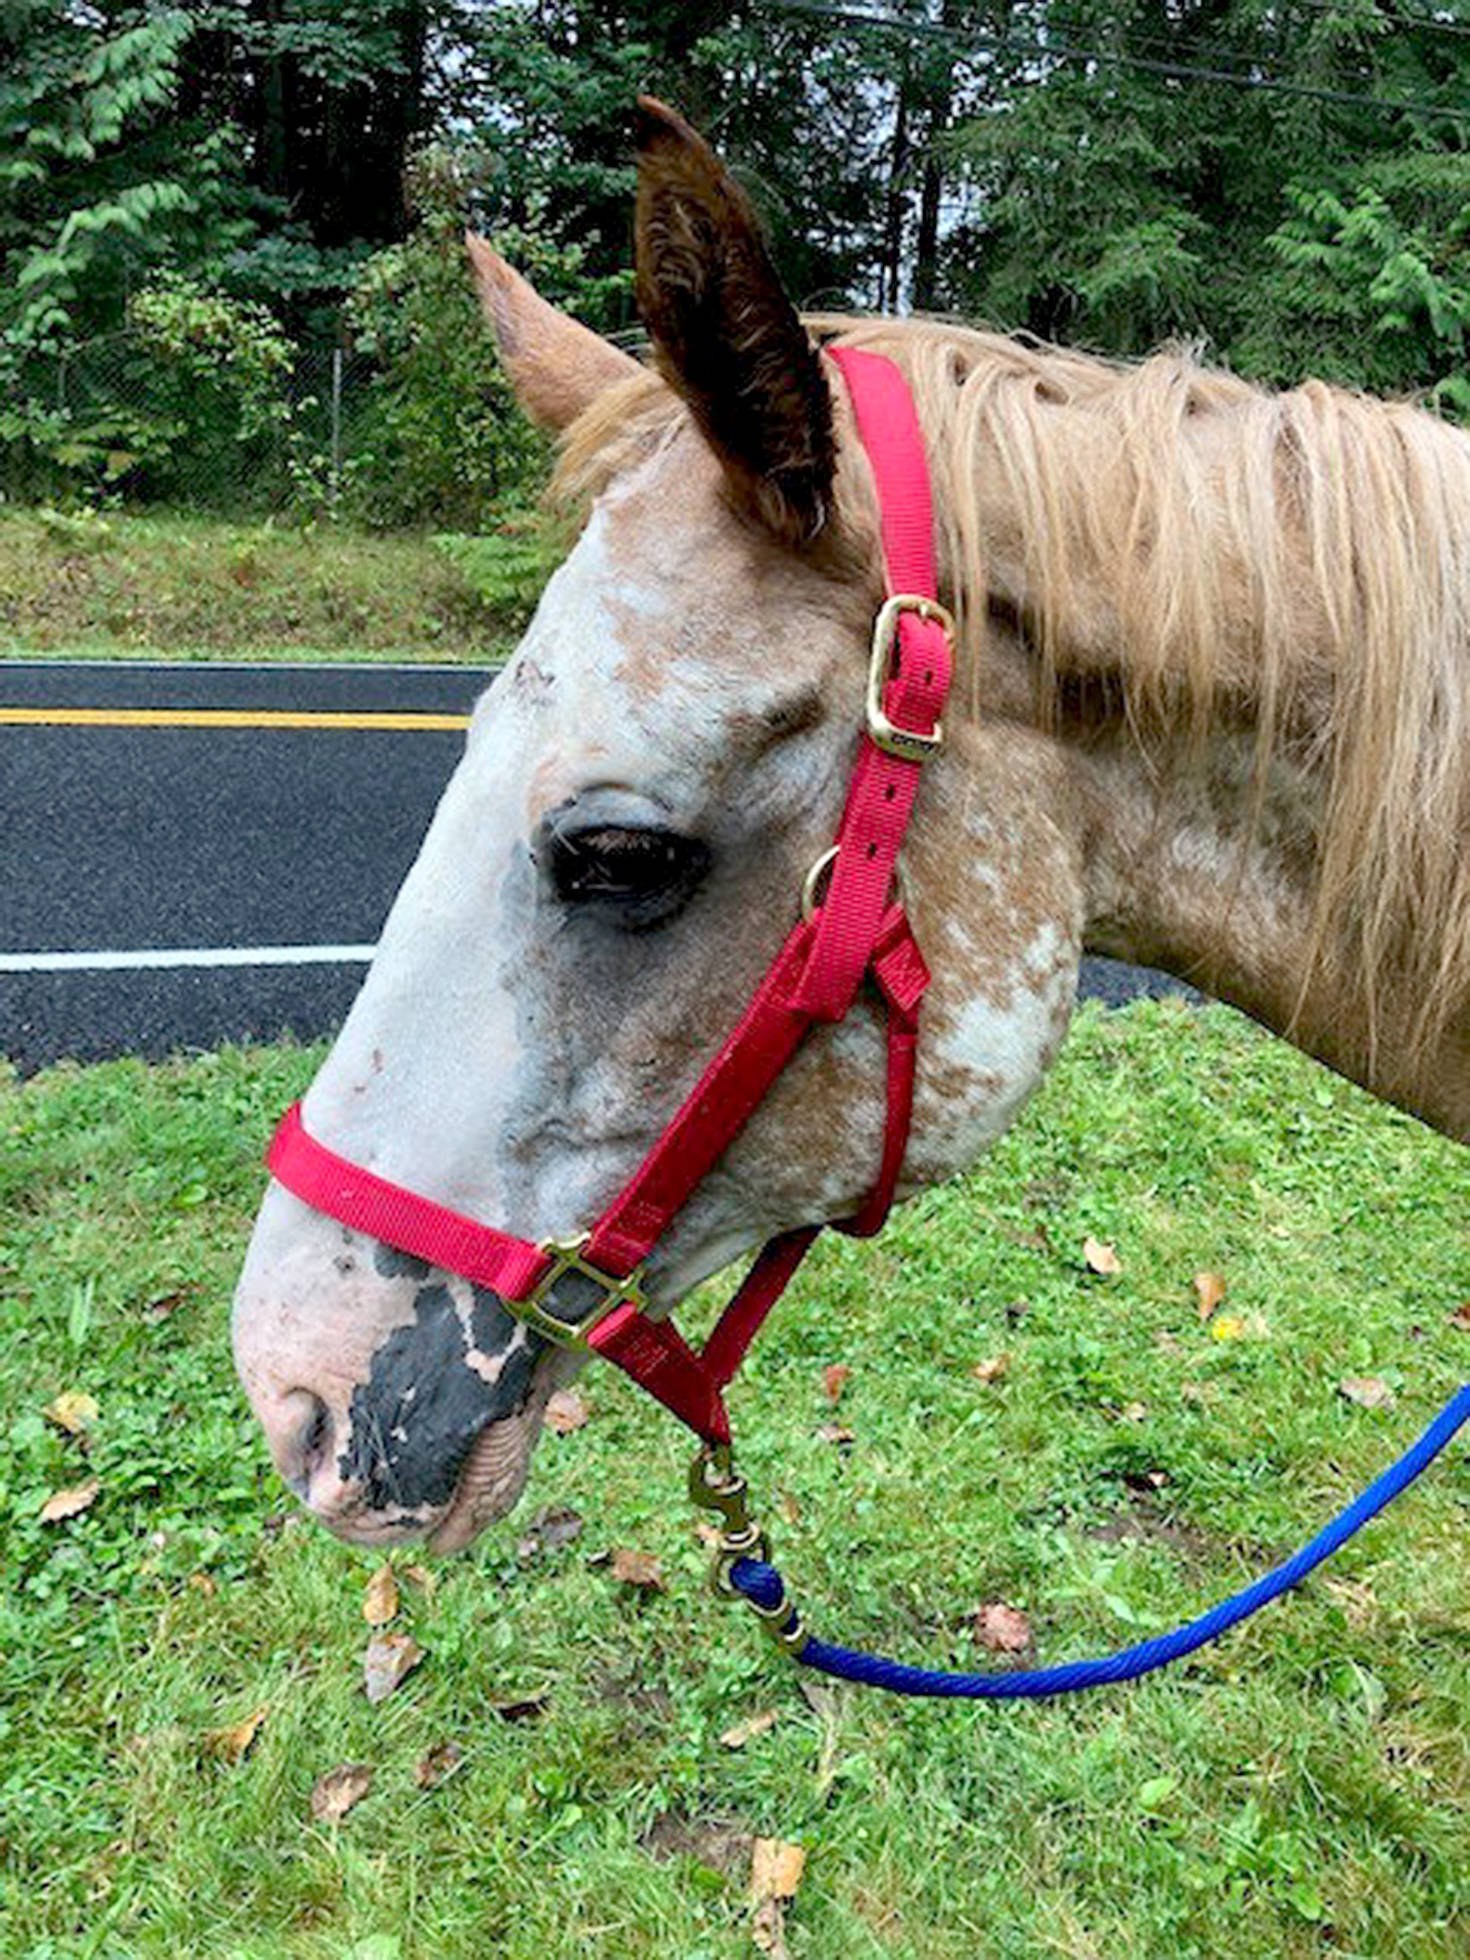 A 20-year-old, starving horse was found near Cedar River Elementary School died a few days after being picked up by the county. King County investigators are looking for the horse’s owners. Photo courtesy of King County.